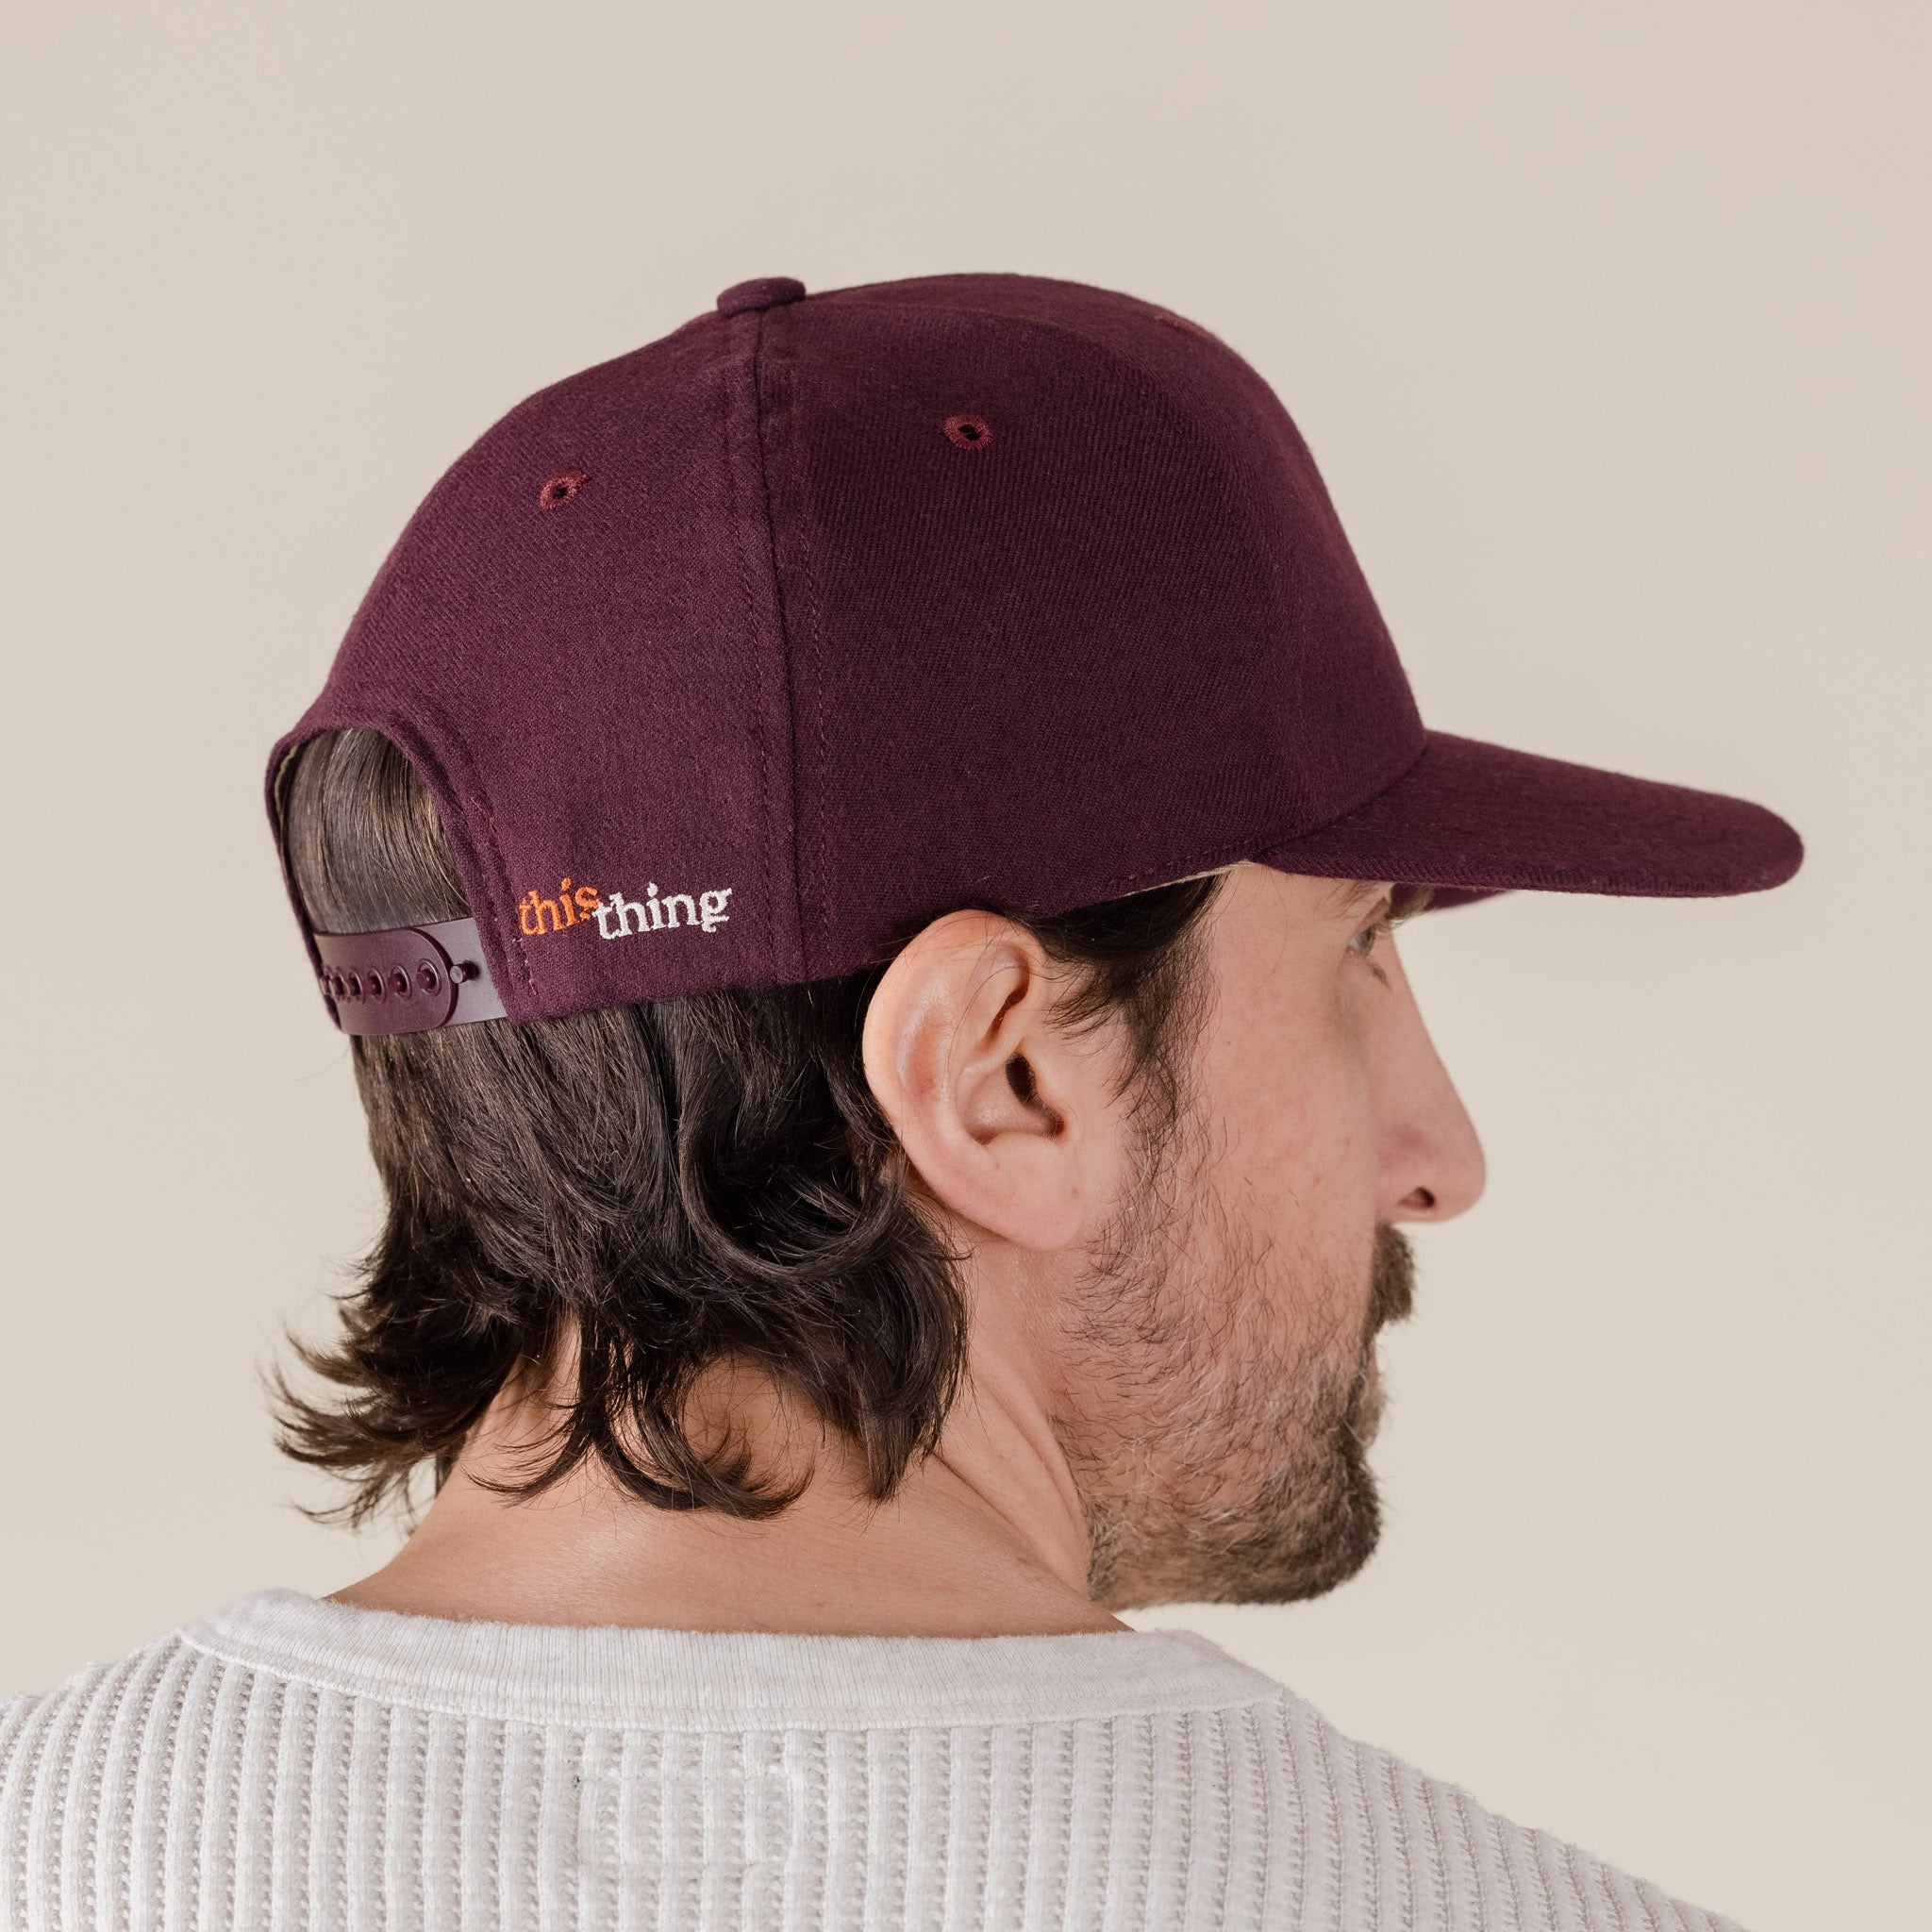 This Thing - 90s Athletic Cap - Burgundy Snapback